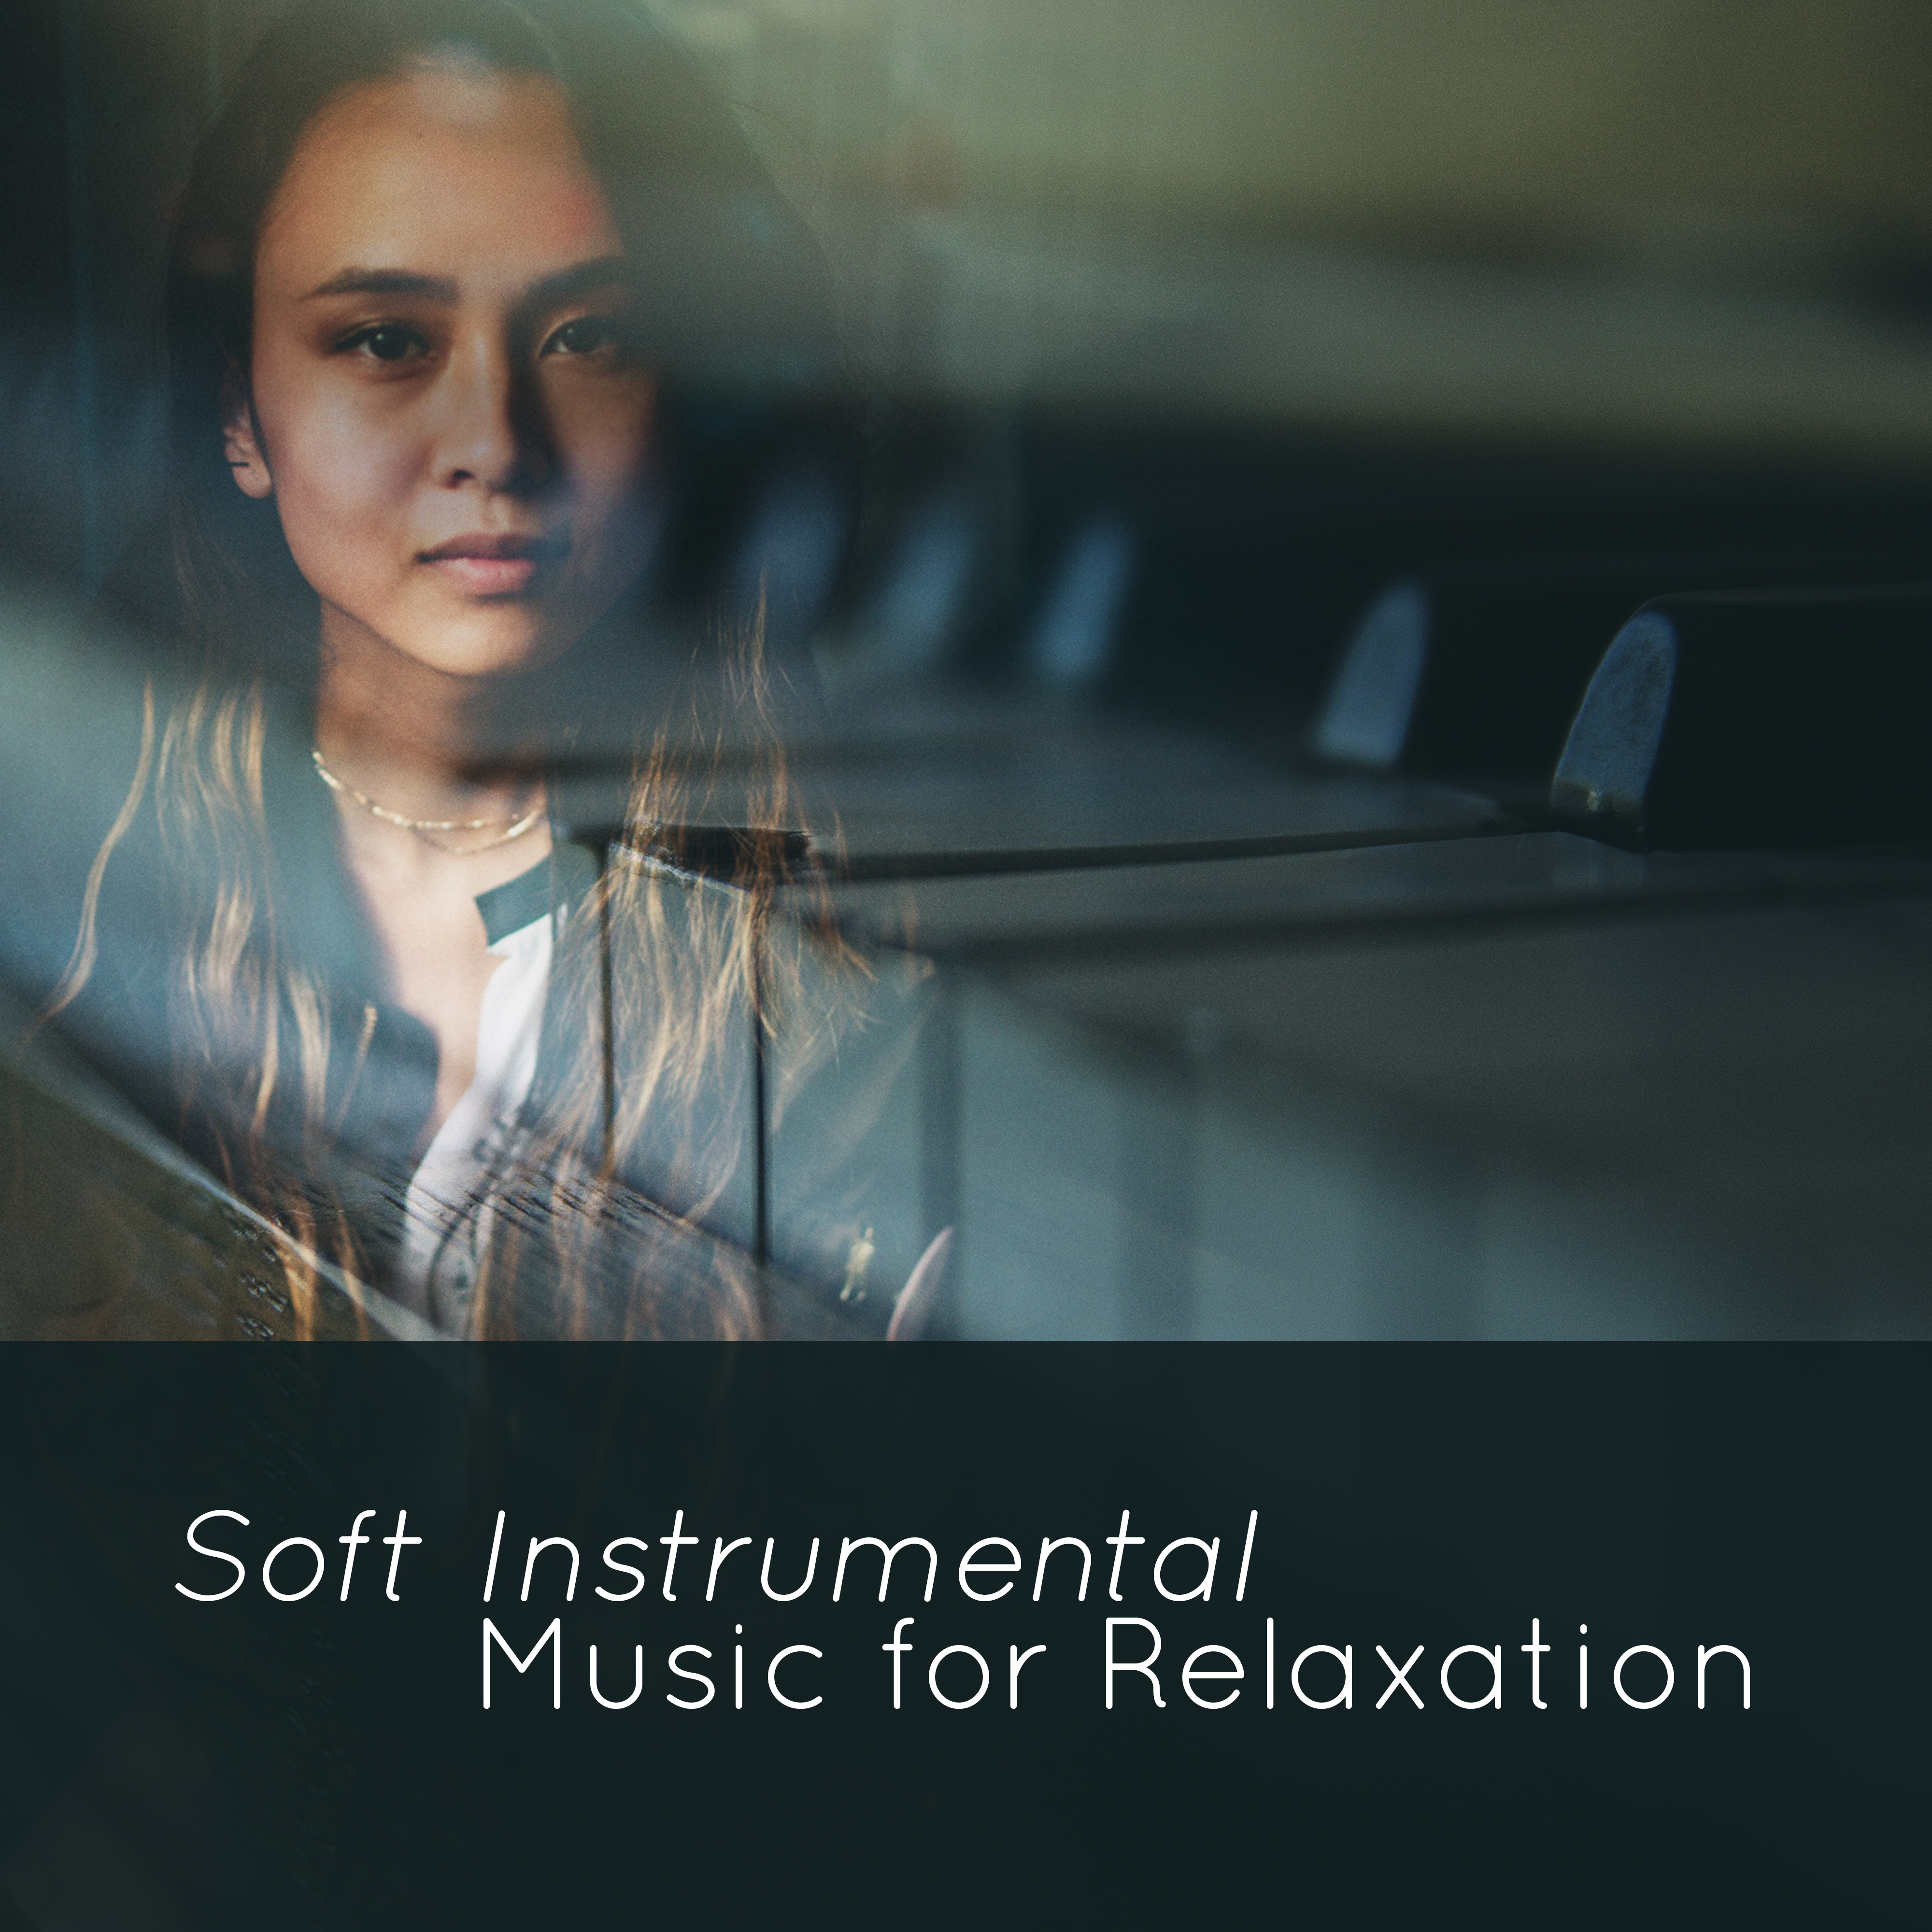 Soft Instrumental Music for Relaxation